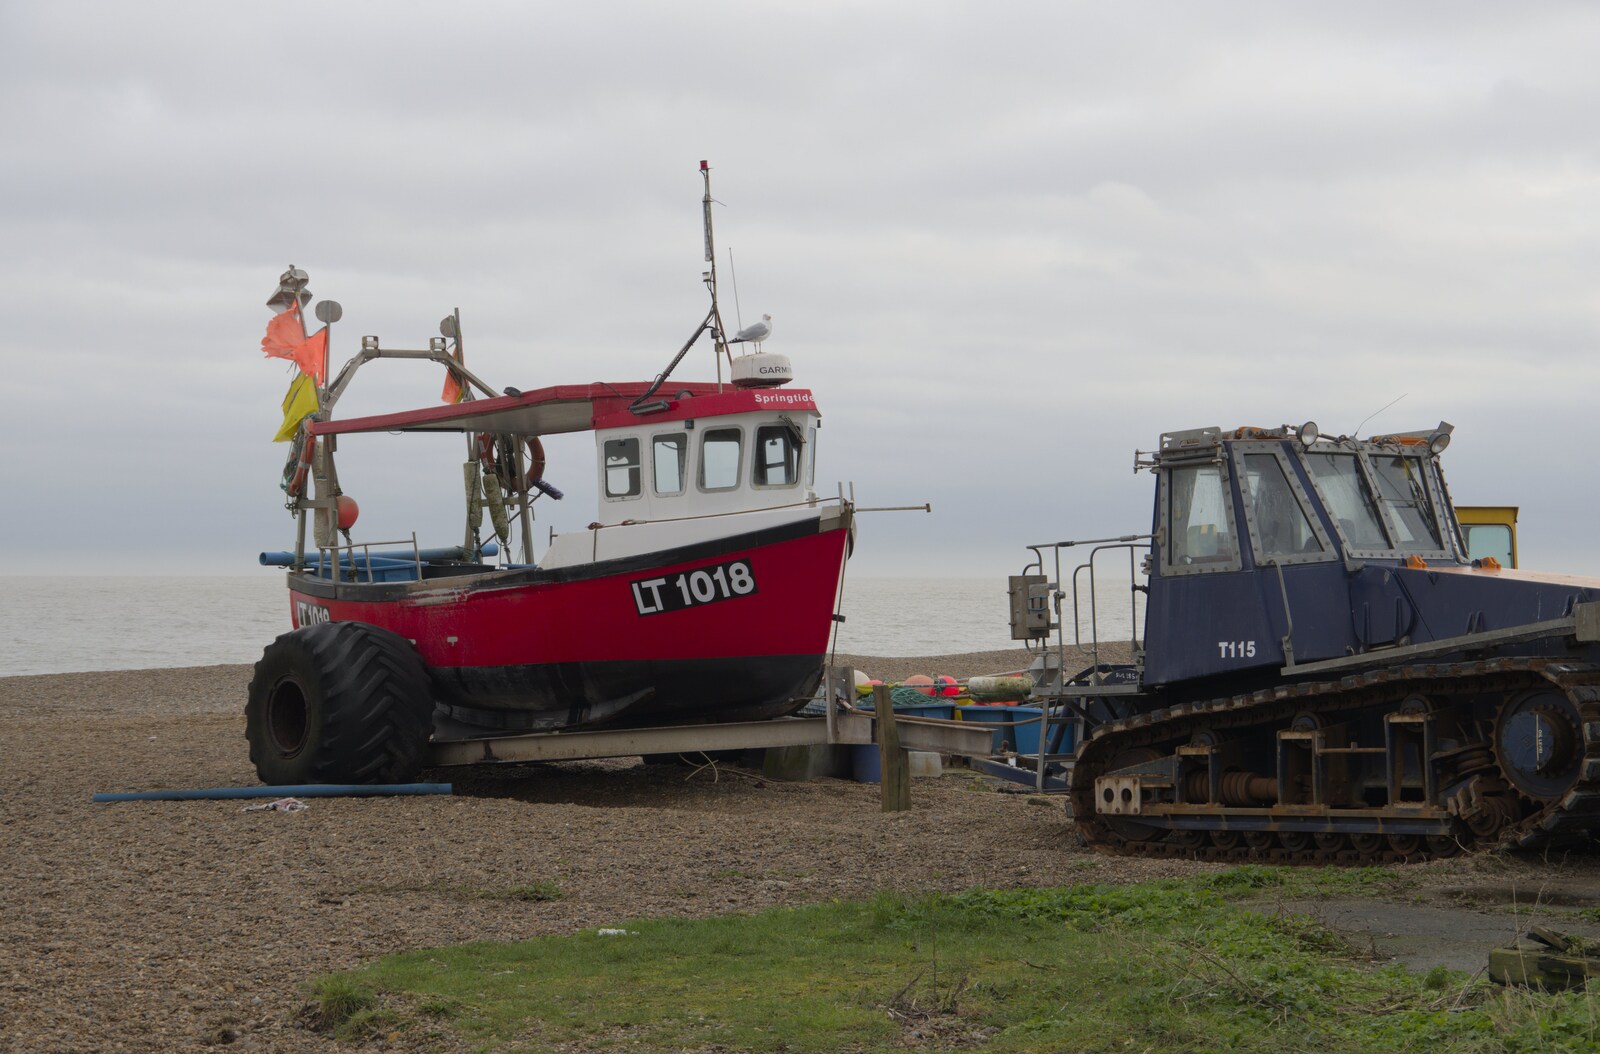 A fishing boat on the beach from Framlingham, Aldeburgh and the USAAF Heritage Trust, Hoxne, Suffolk - 14th February 2024 